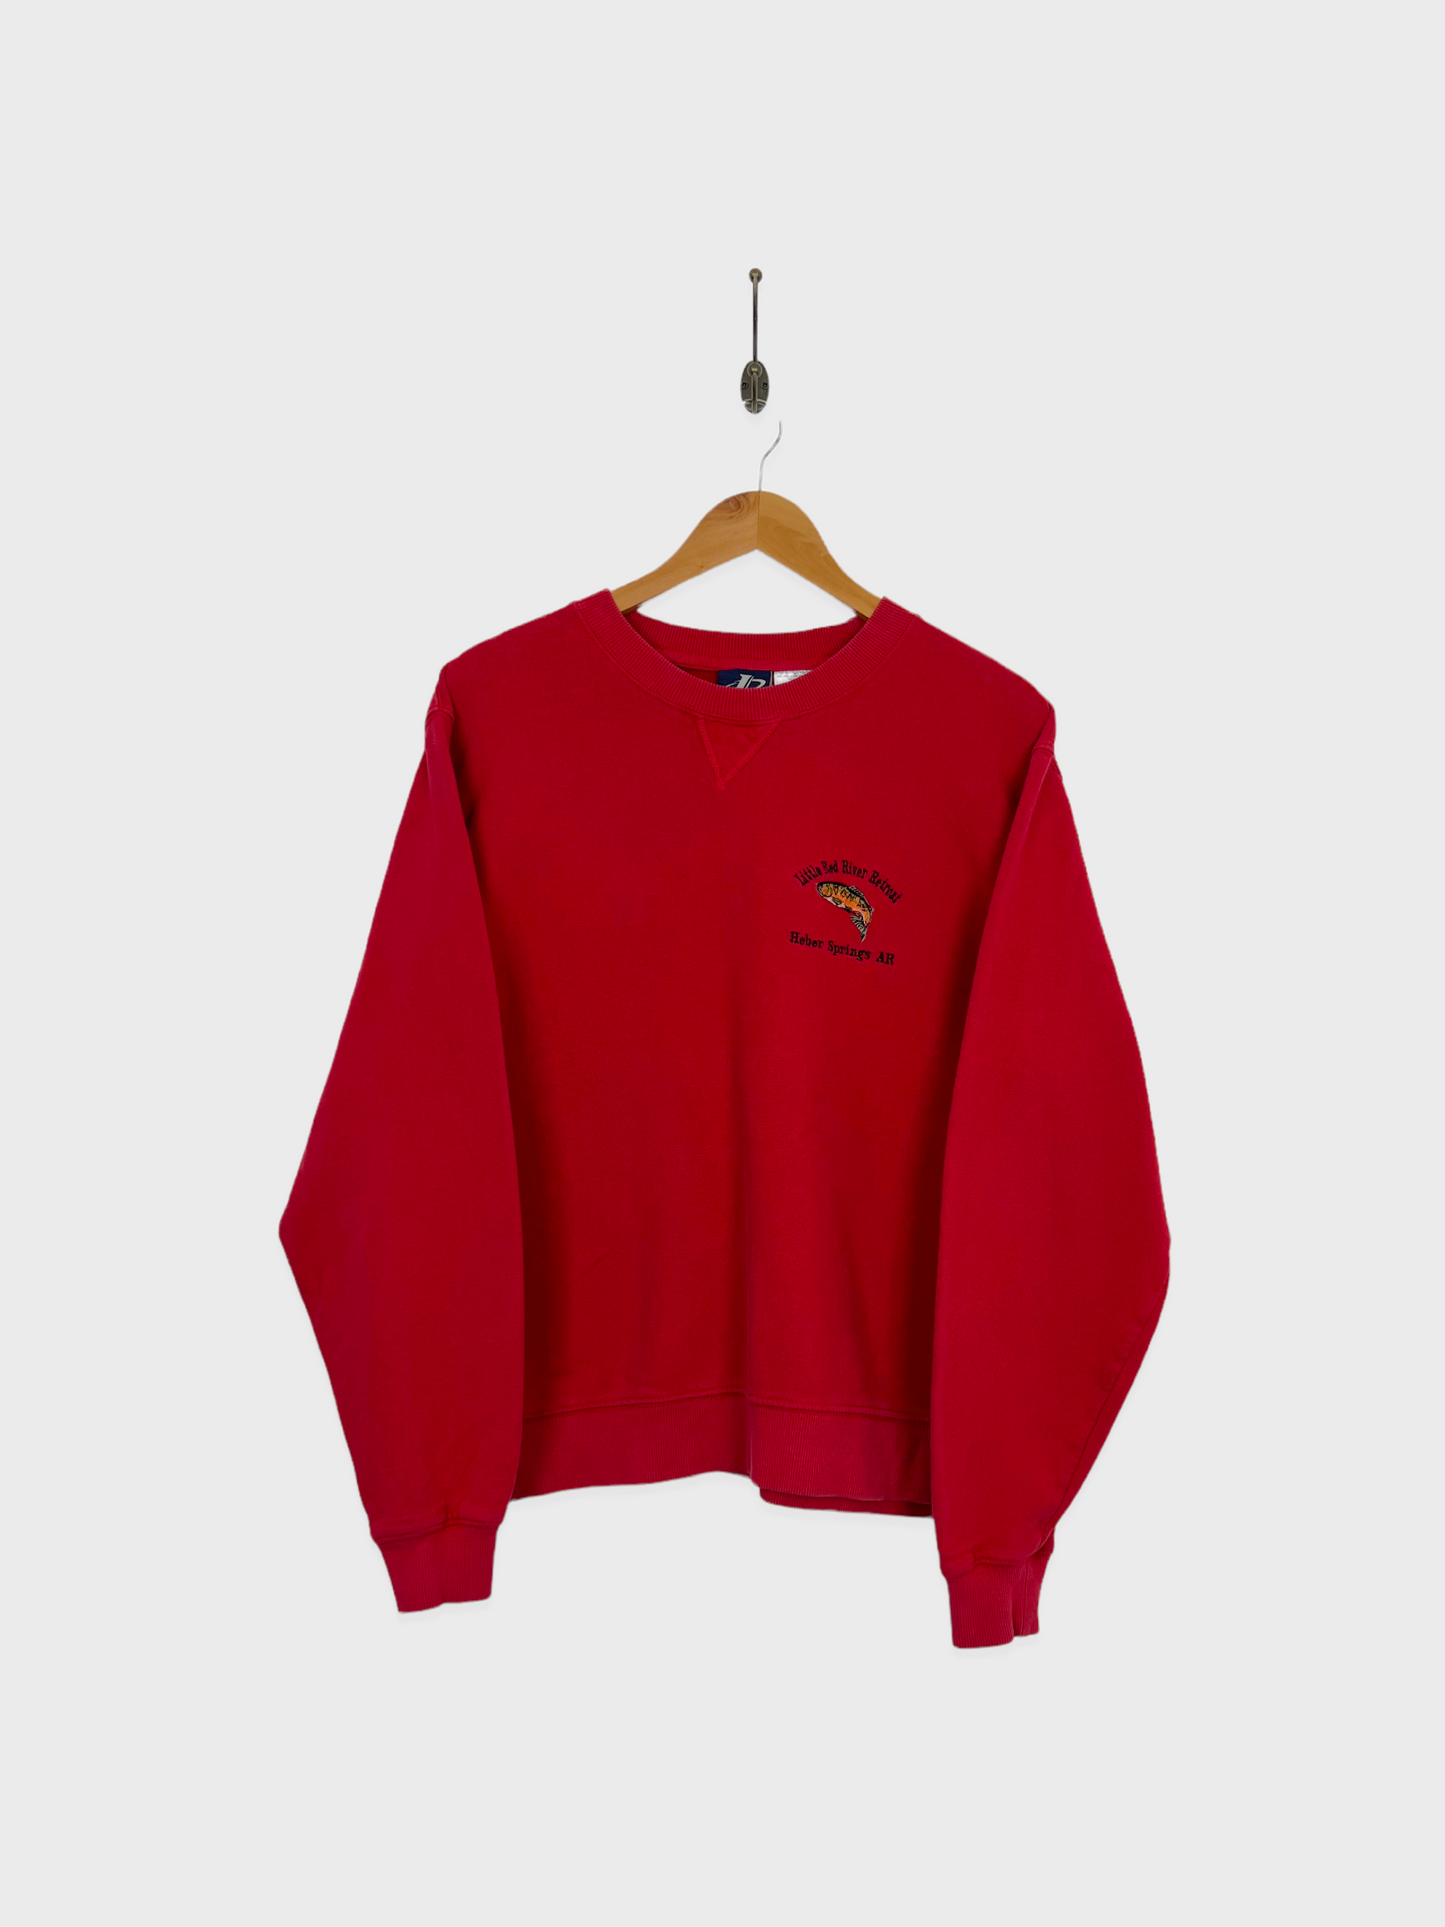 90's Little Red River Retreat Embroidered Vintage Sweatshirt Size 10